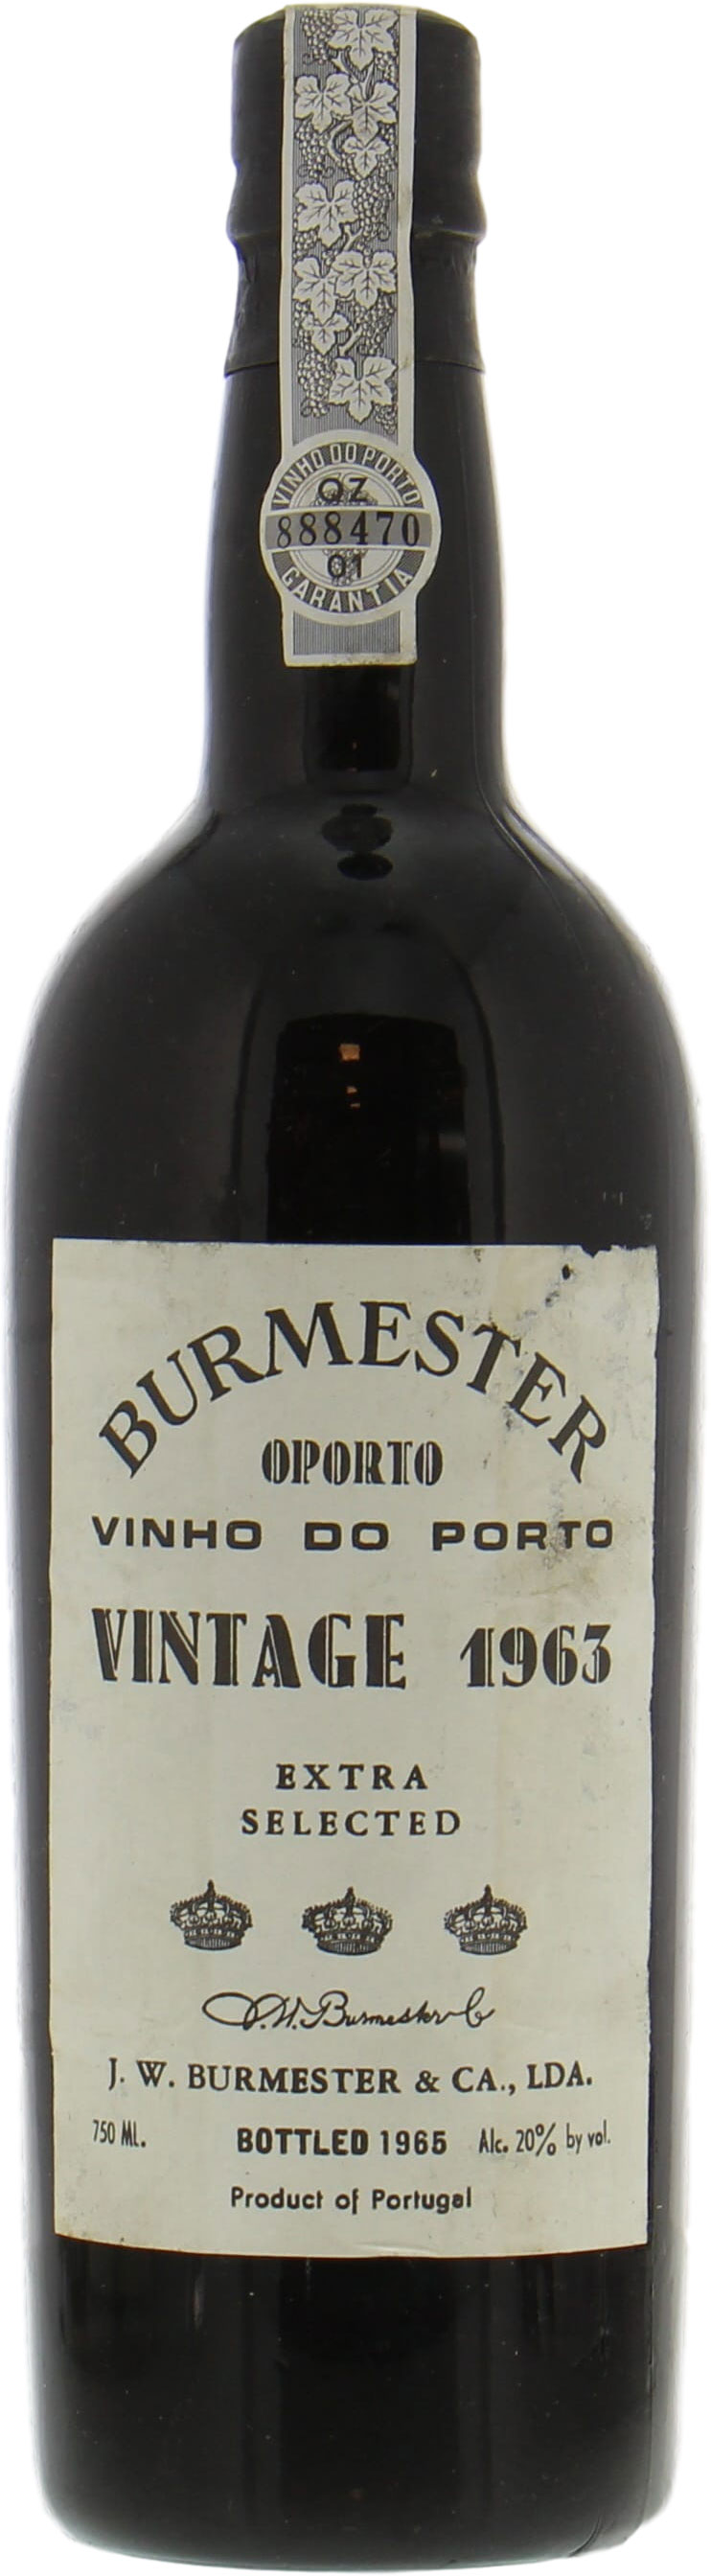 Burmester - Vintage Port extra selected 1963 Perfect